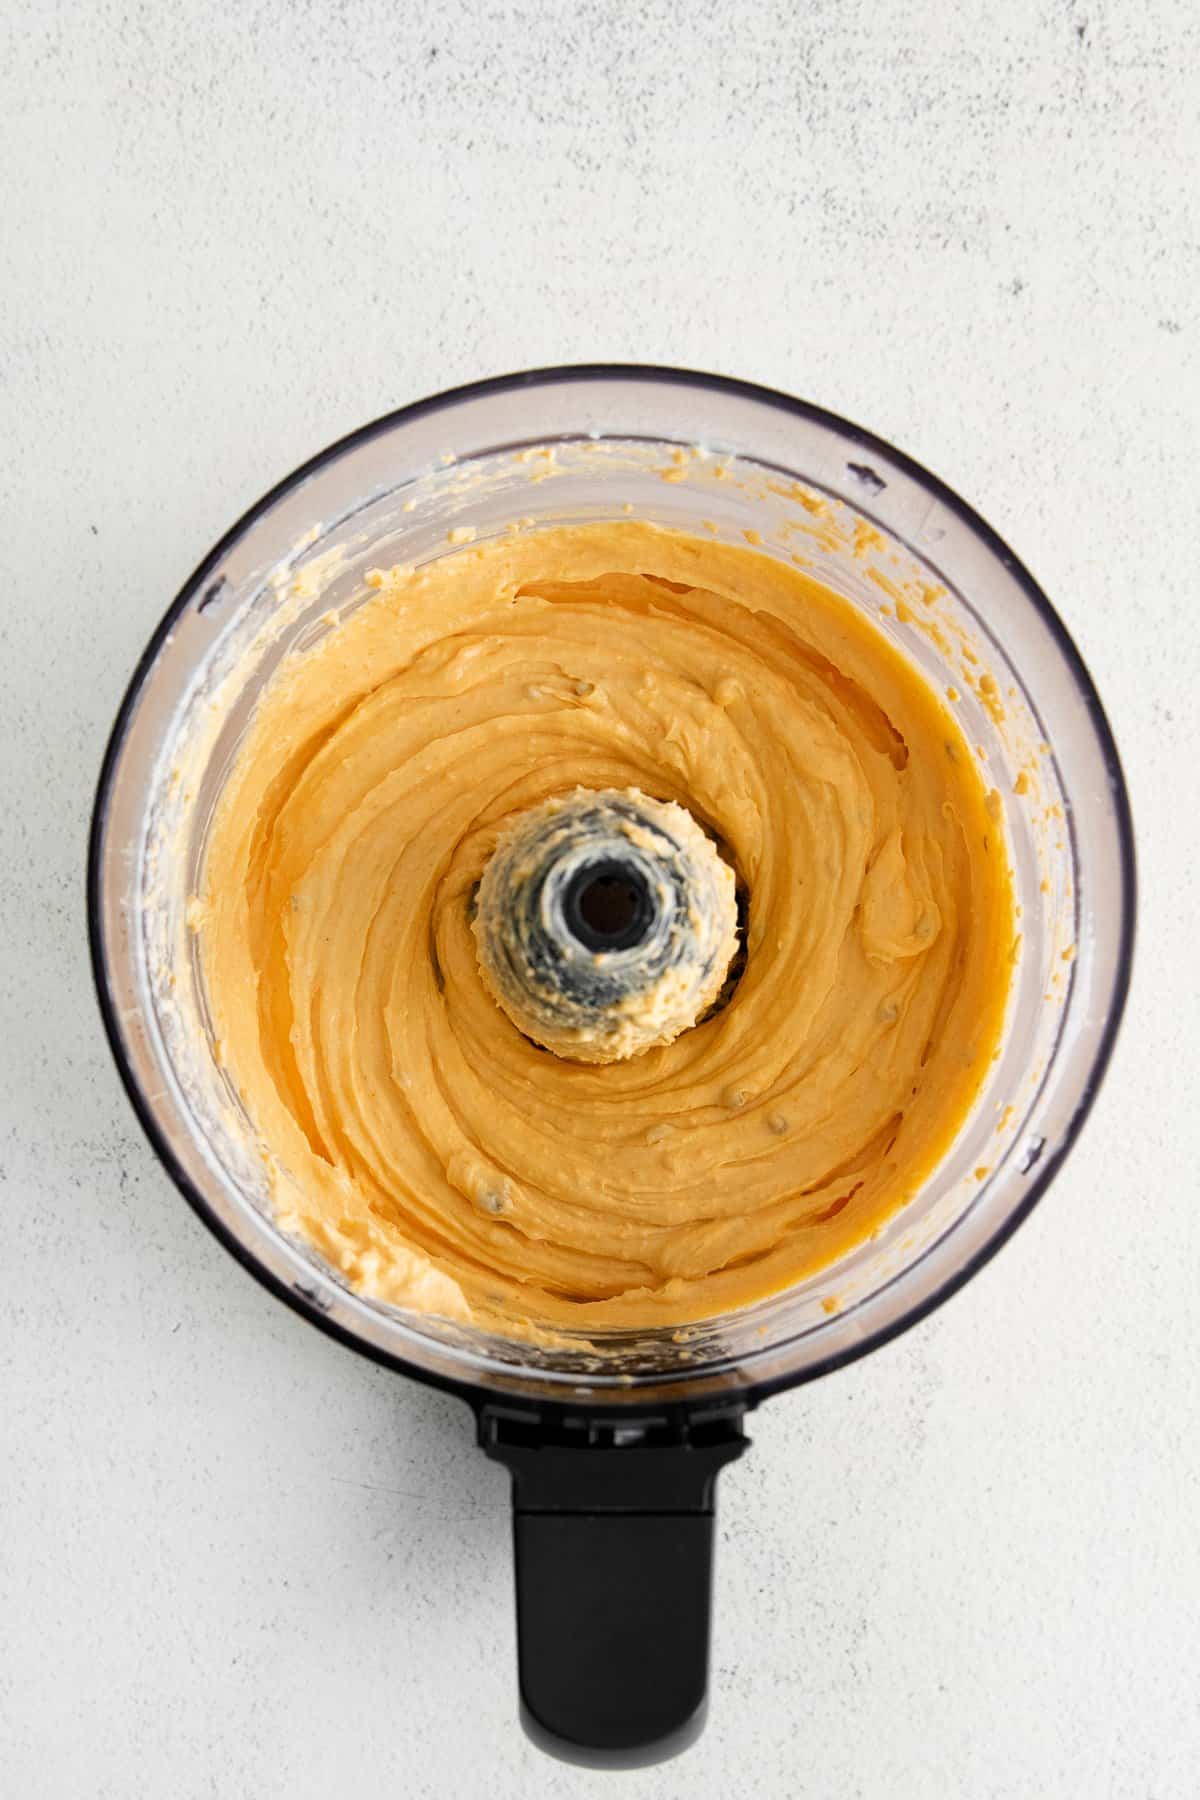 Homemade cheese spread in a food processor.